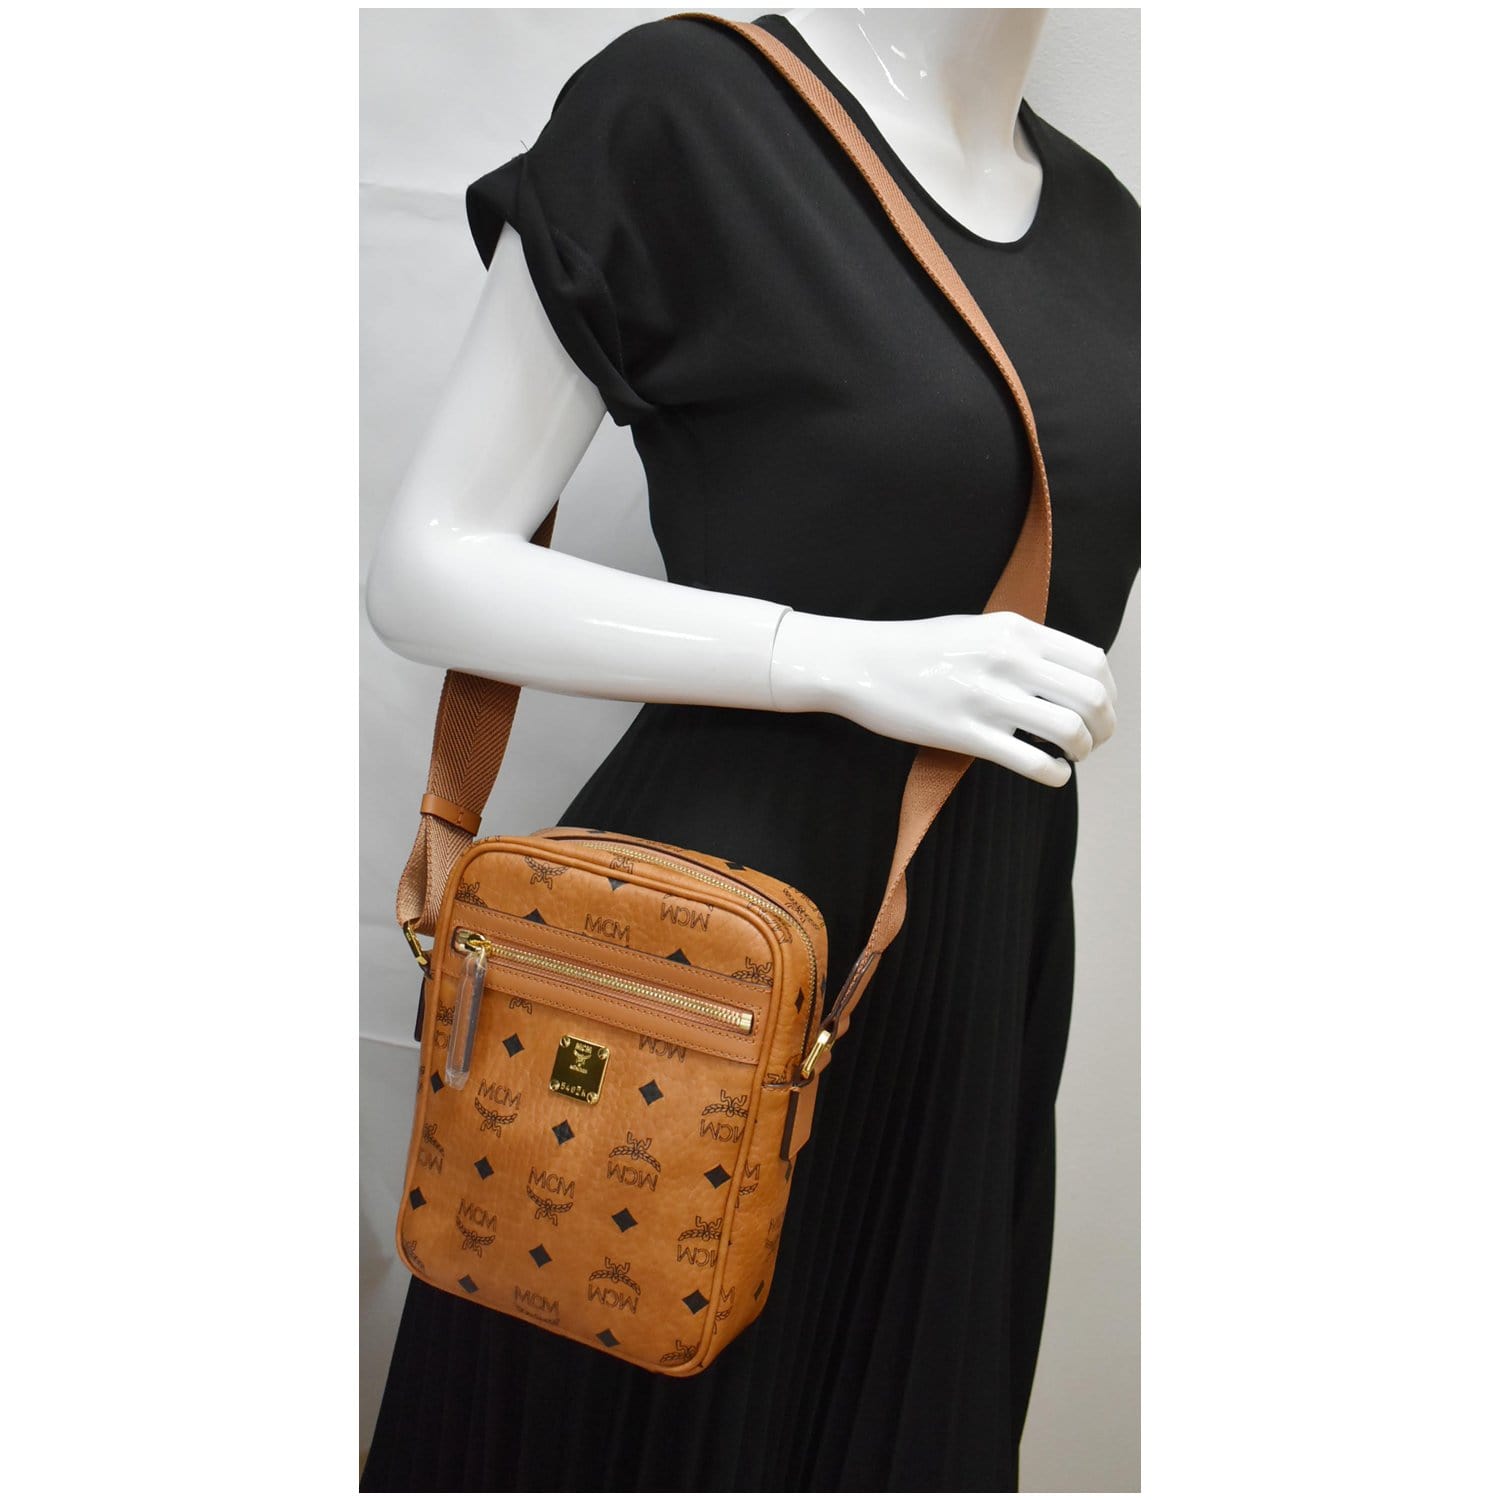 Vintage MCM classic brown mini kelly bag with key, designed by